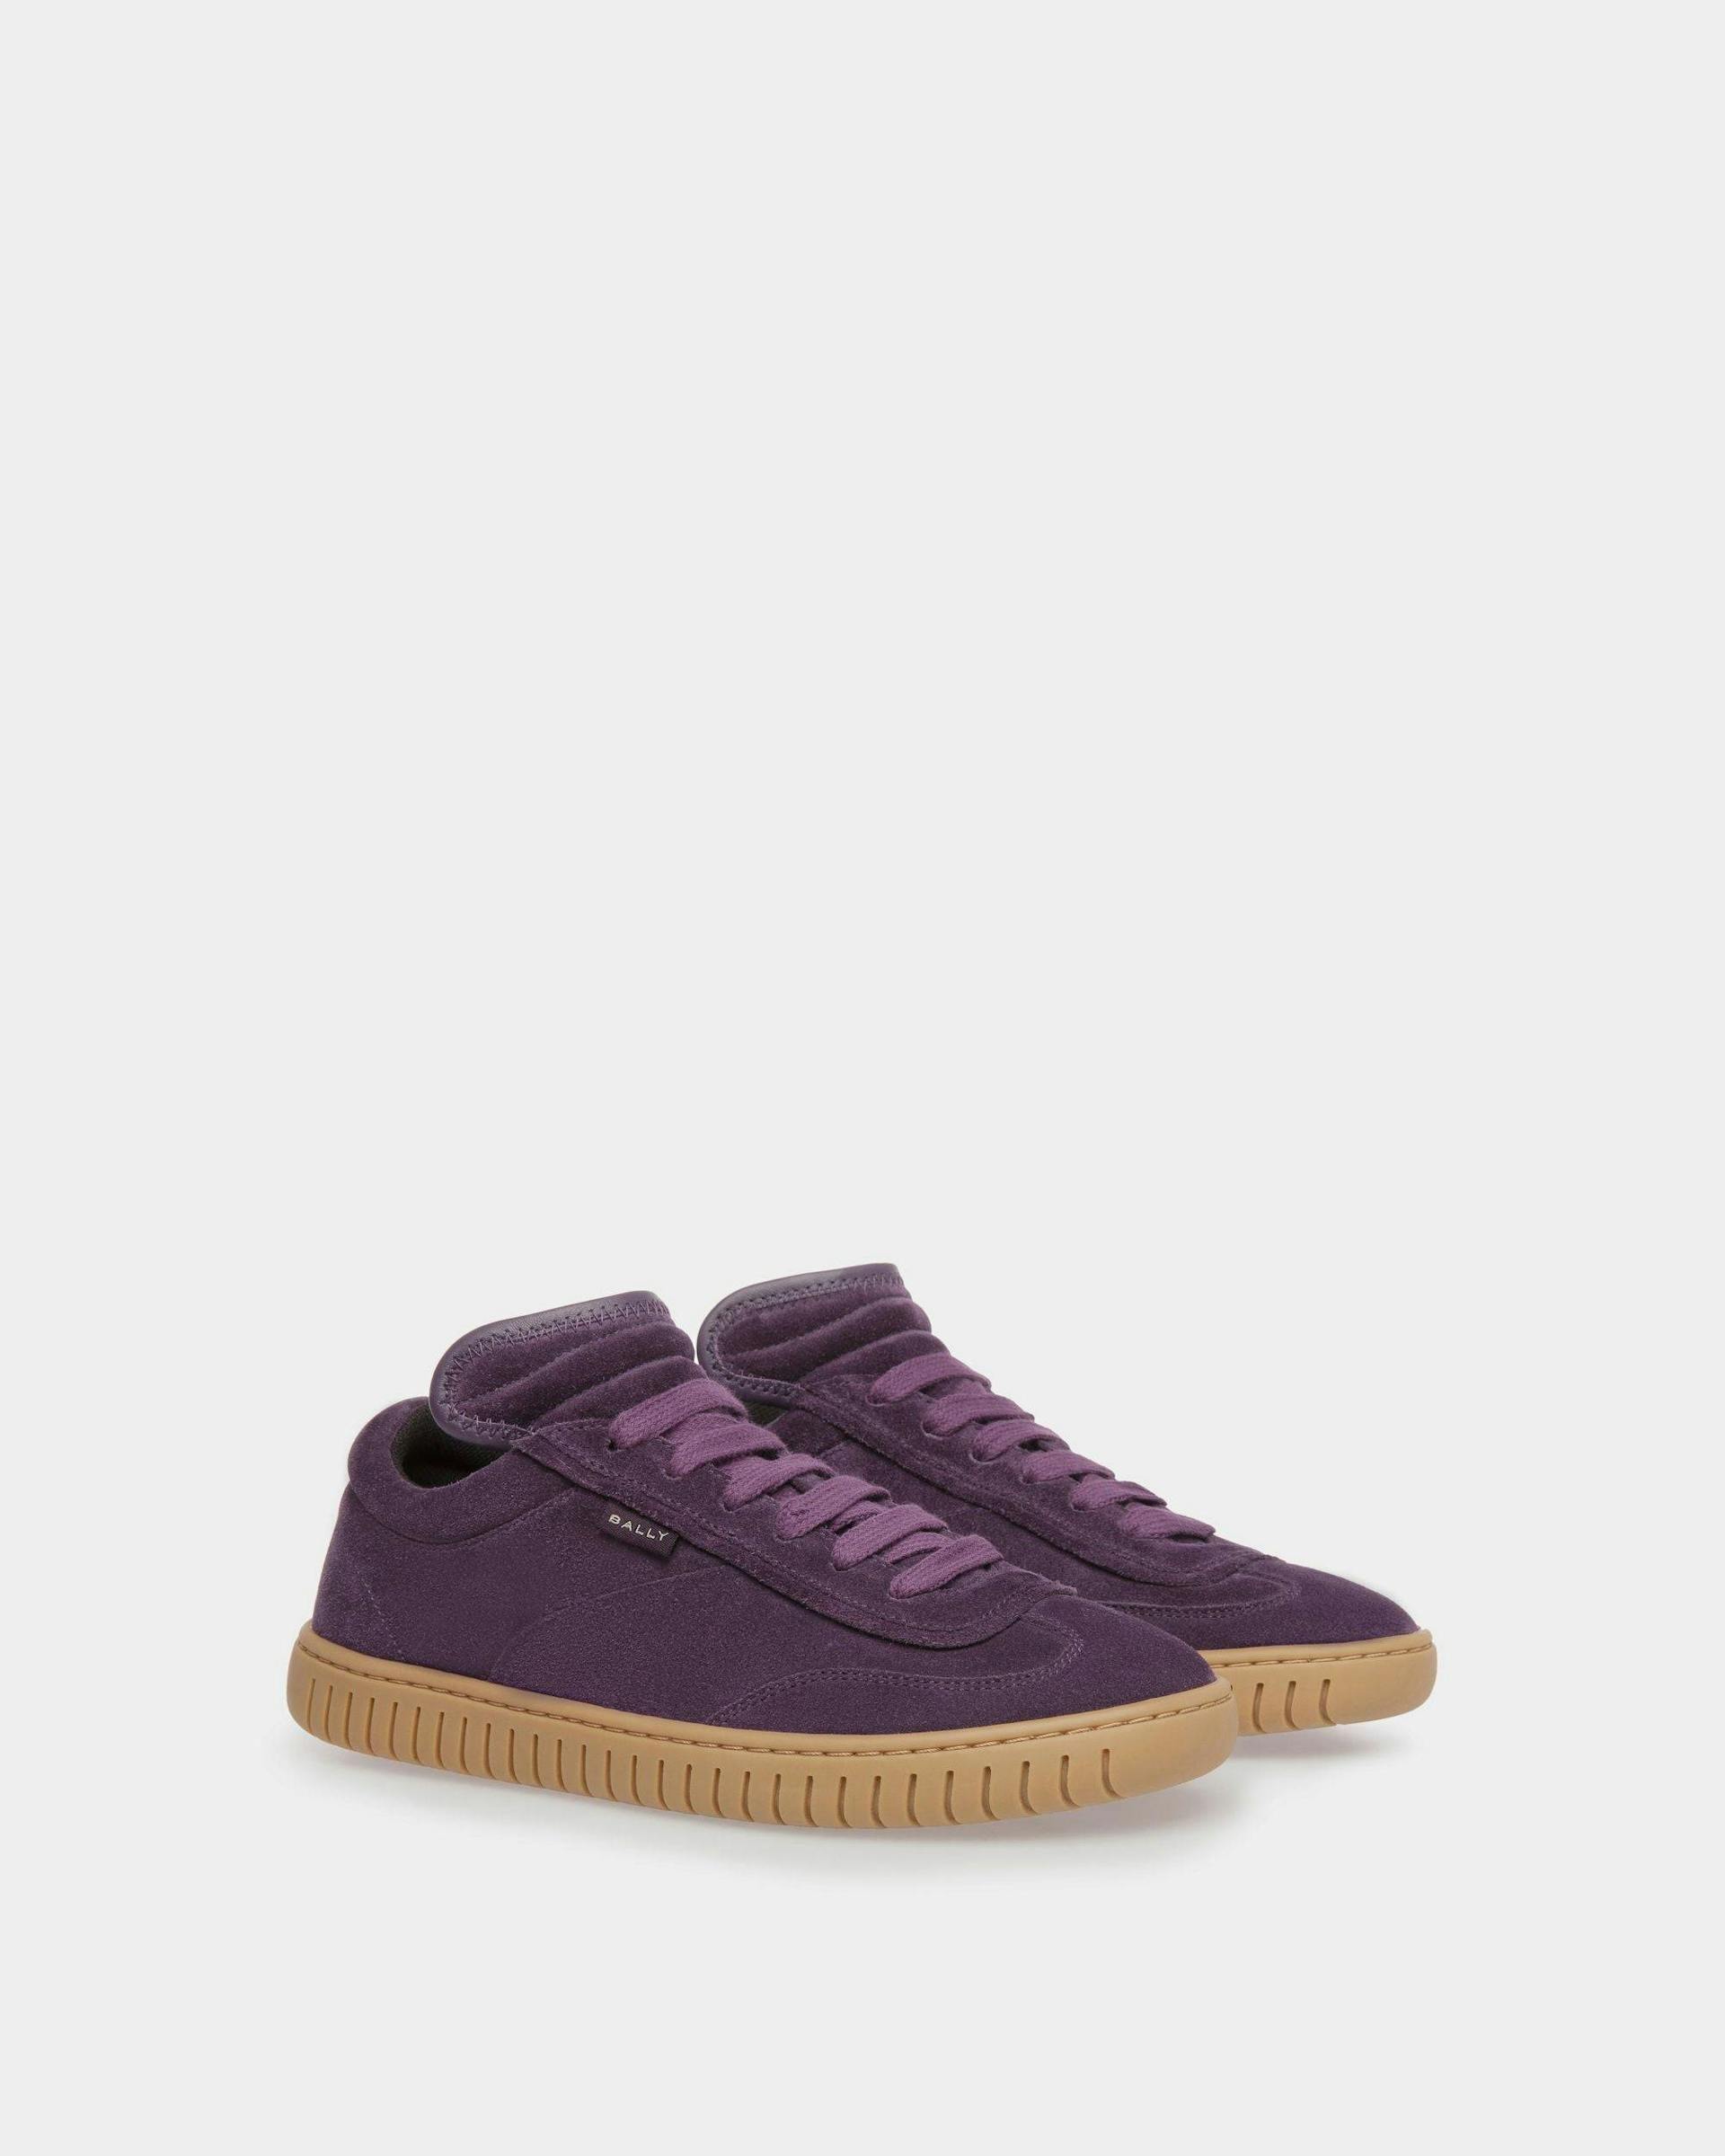 Player Sneakers In Orchid And Amber Leather - Women's - Bally - 02